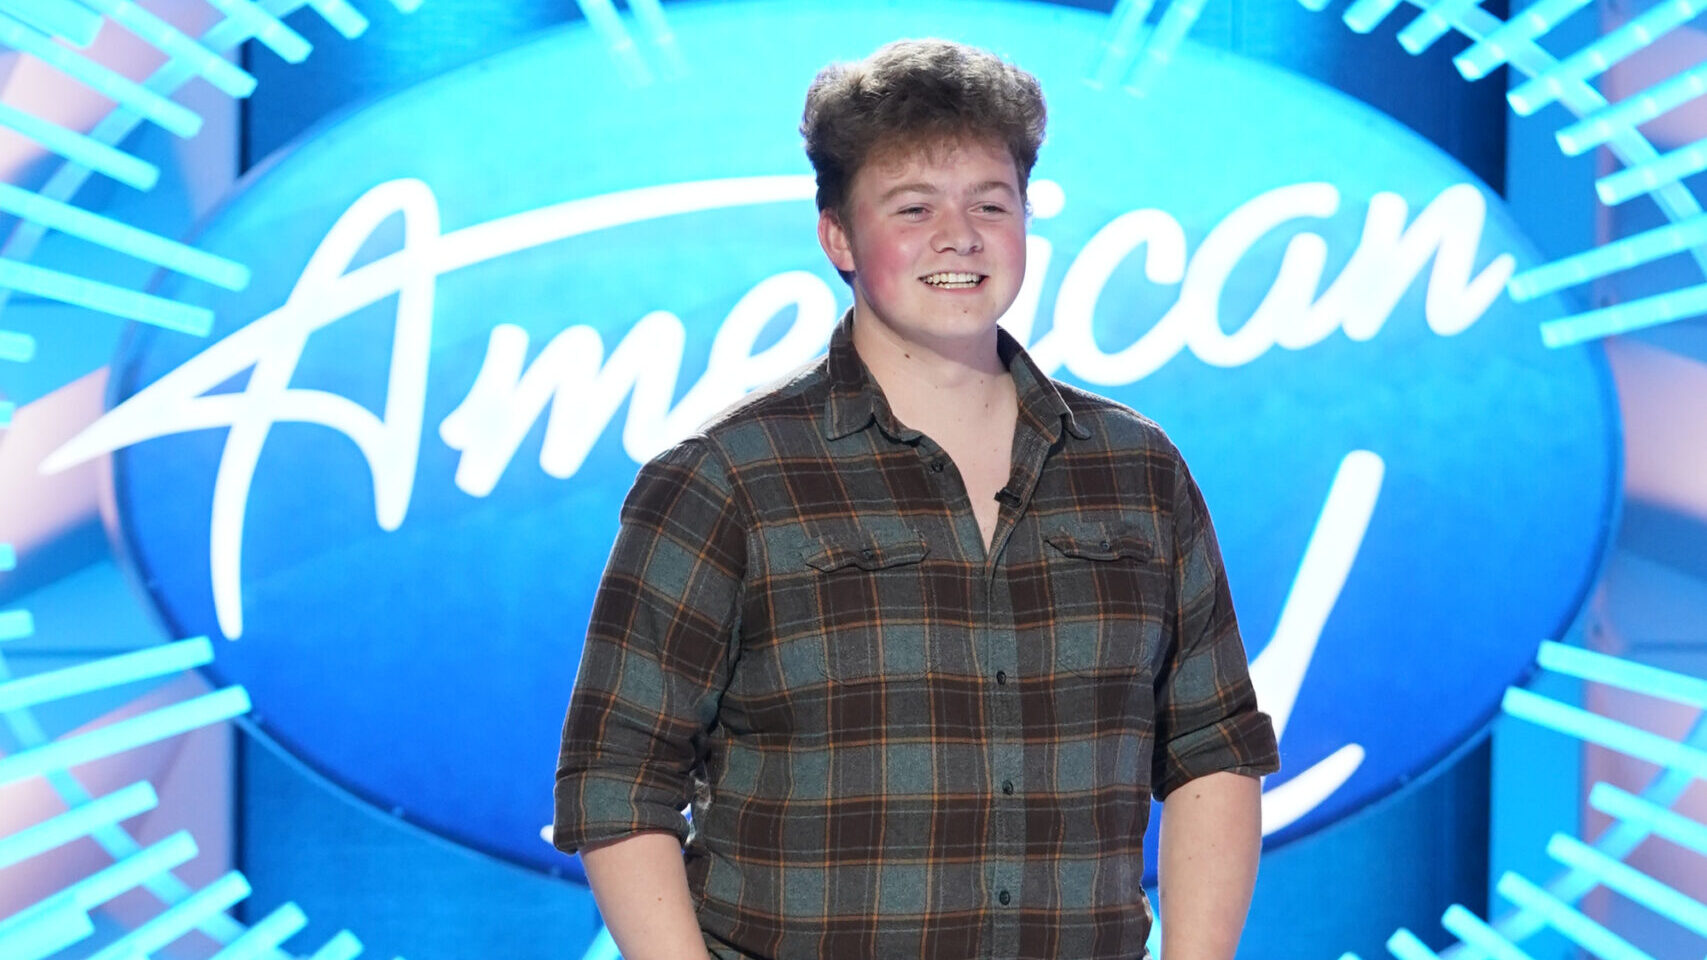 American Idol 2022 Auditions 2: Meet The Contestants (Photos)